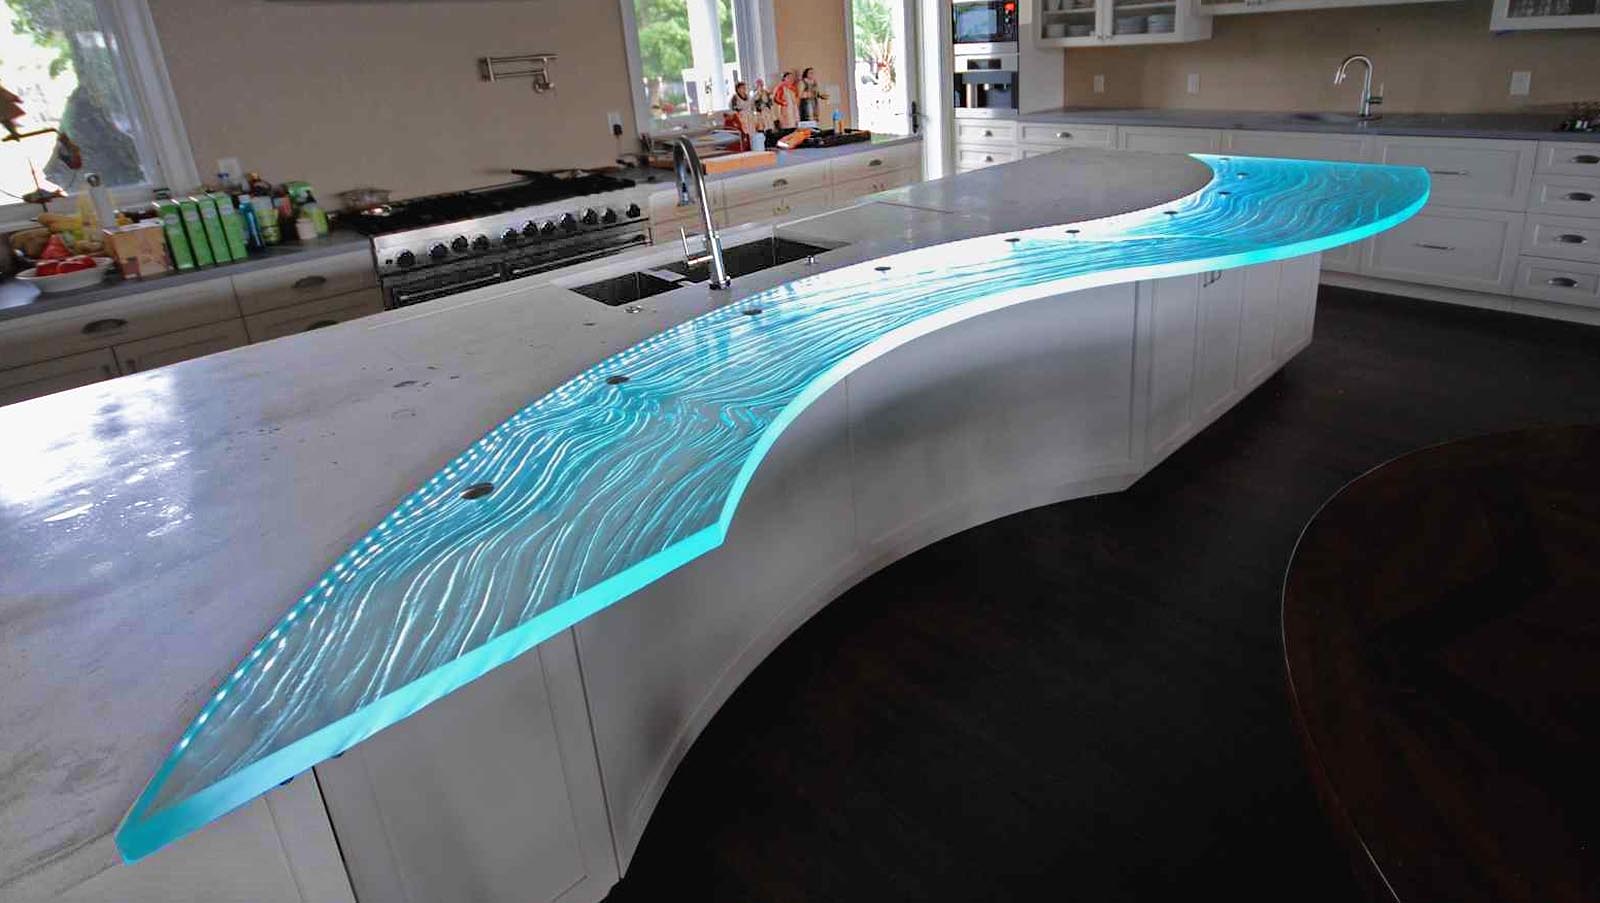 tøjlerne lindring Magtfulde The Pros & Cons of Glass Countertops -